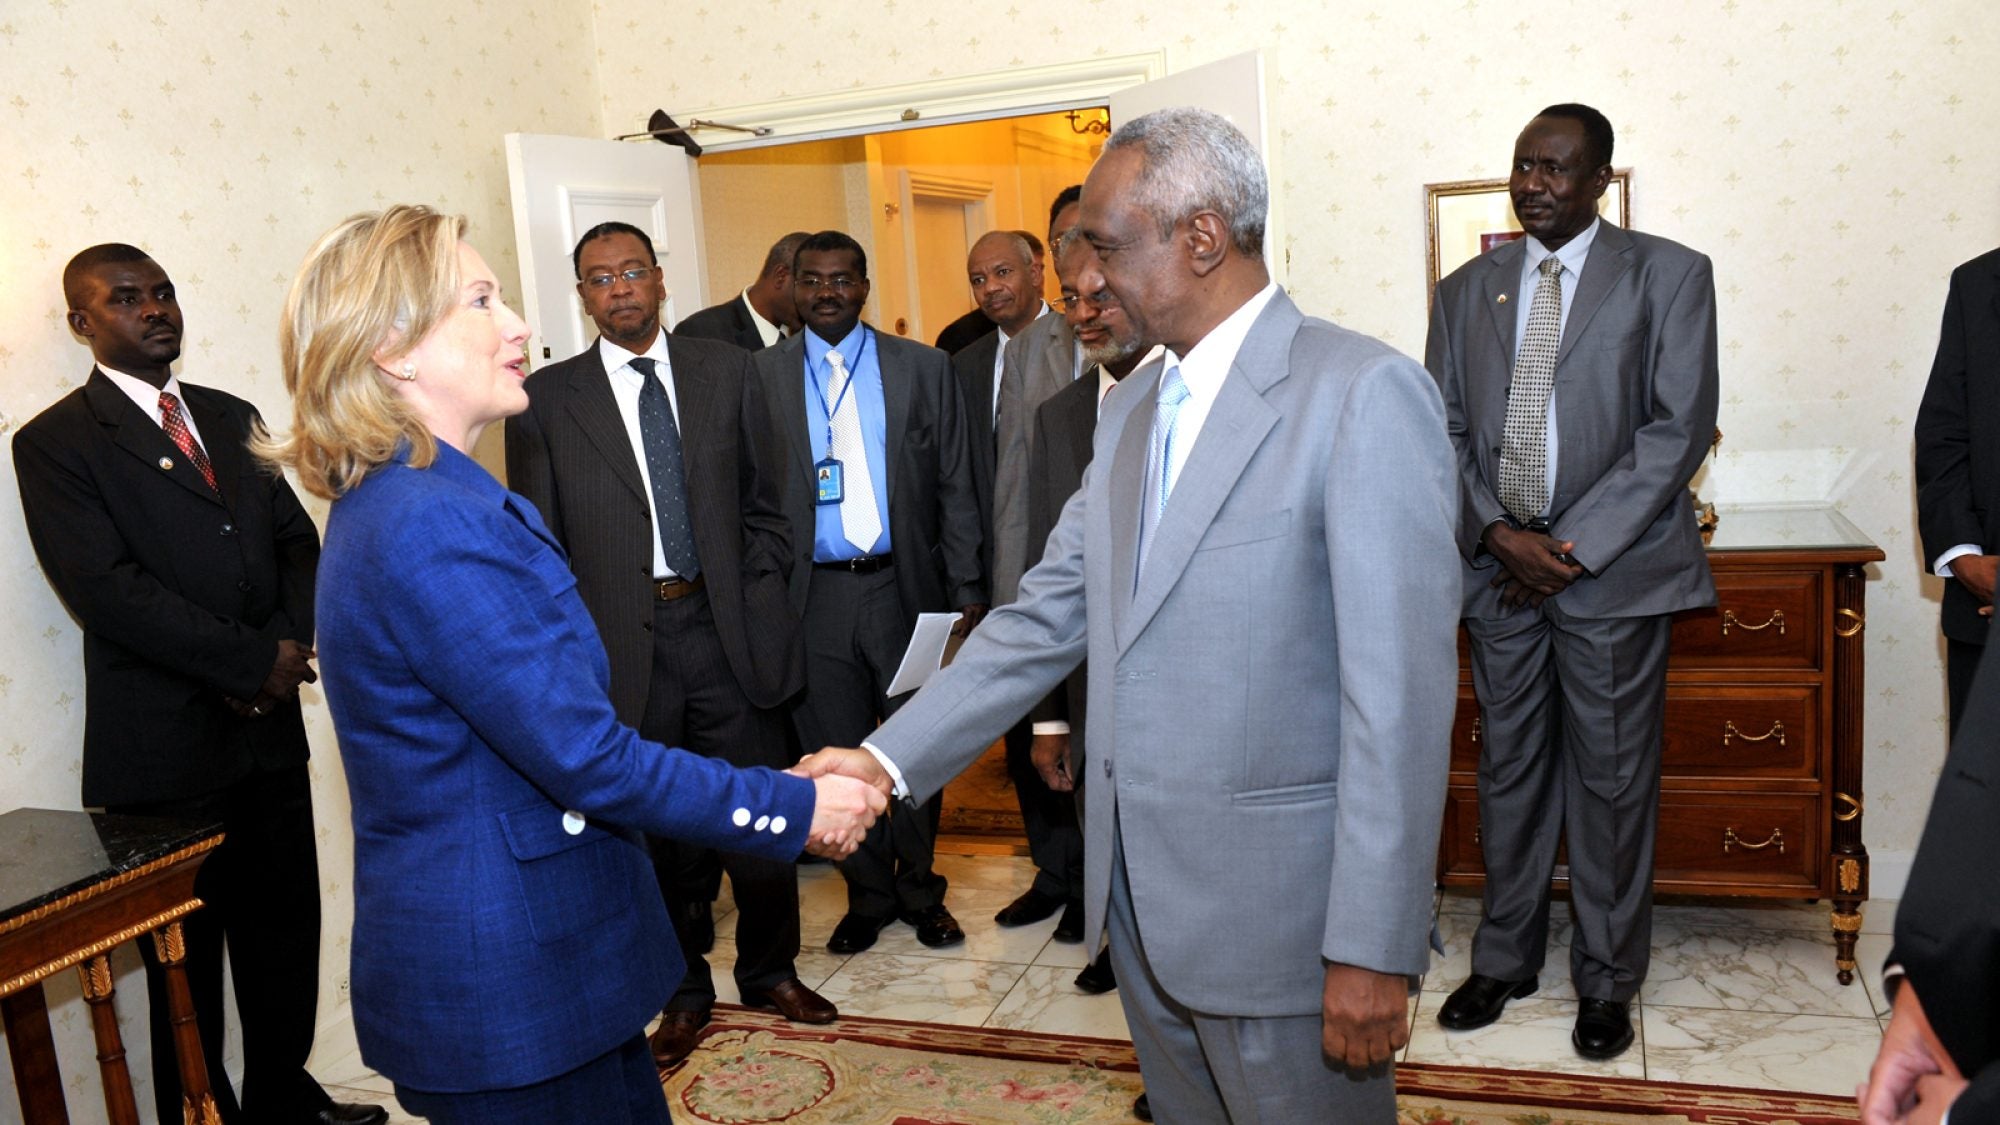 U.S. Secretary of State Hillary Rodham Clinton (left) shakes hands with Sudanese Vice President Ali Osman Taha (right) after their bilateral meeting at the Waldorf-Astoria in New York, New York, on September 21, 2010. [State Department photo/ Public Domain]